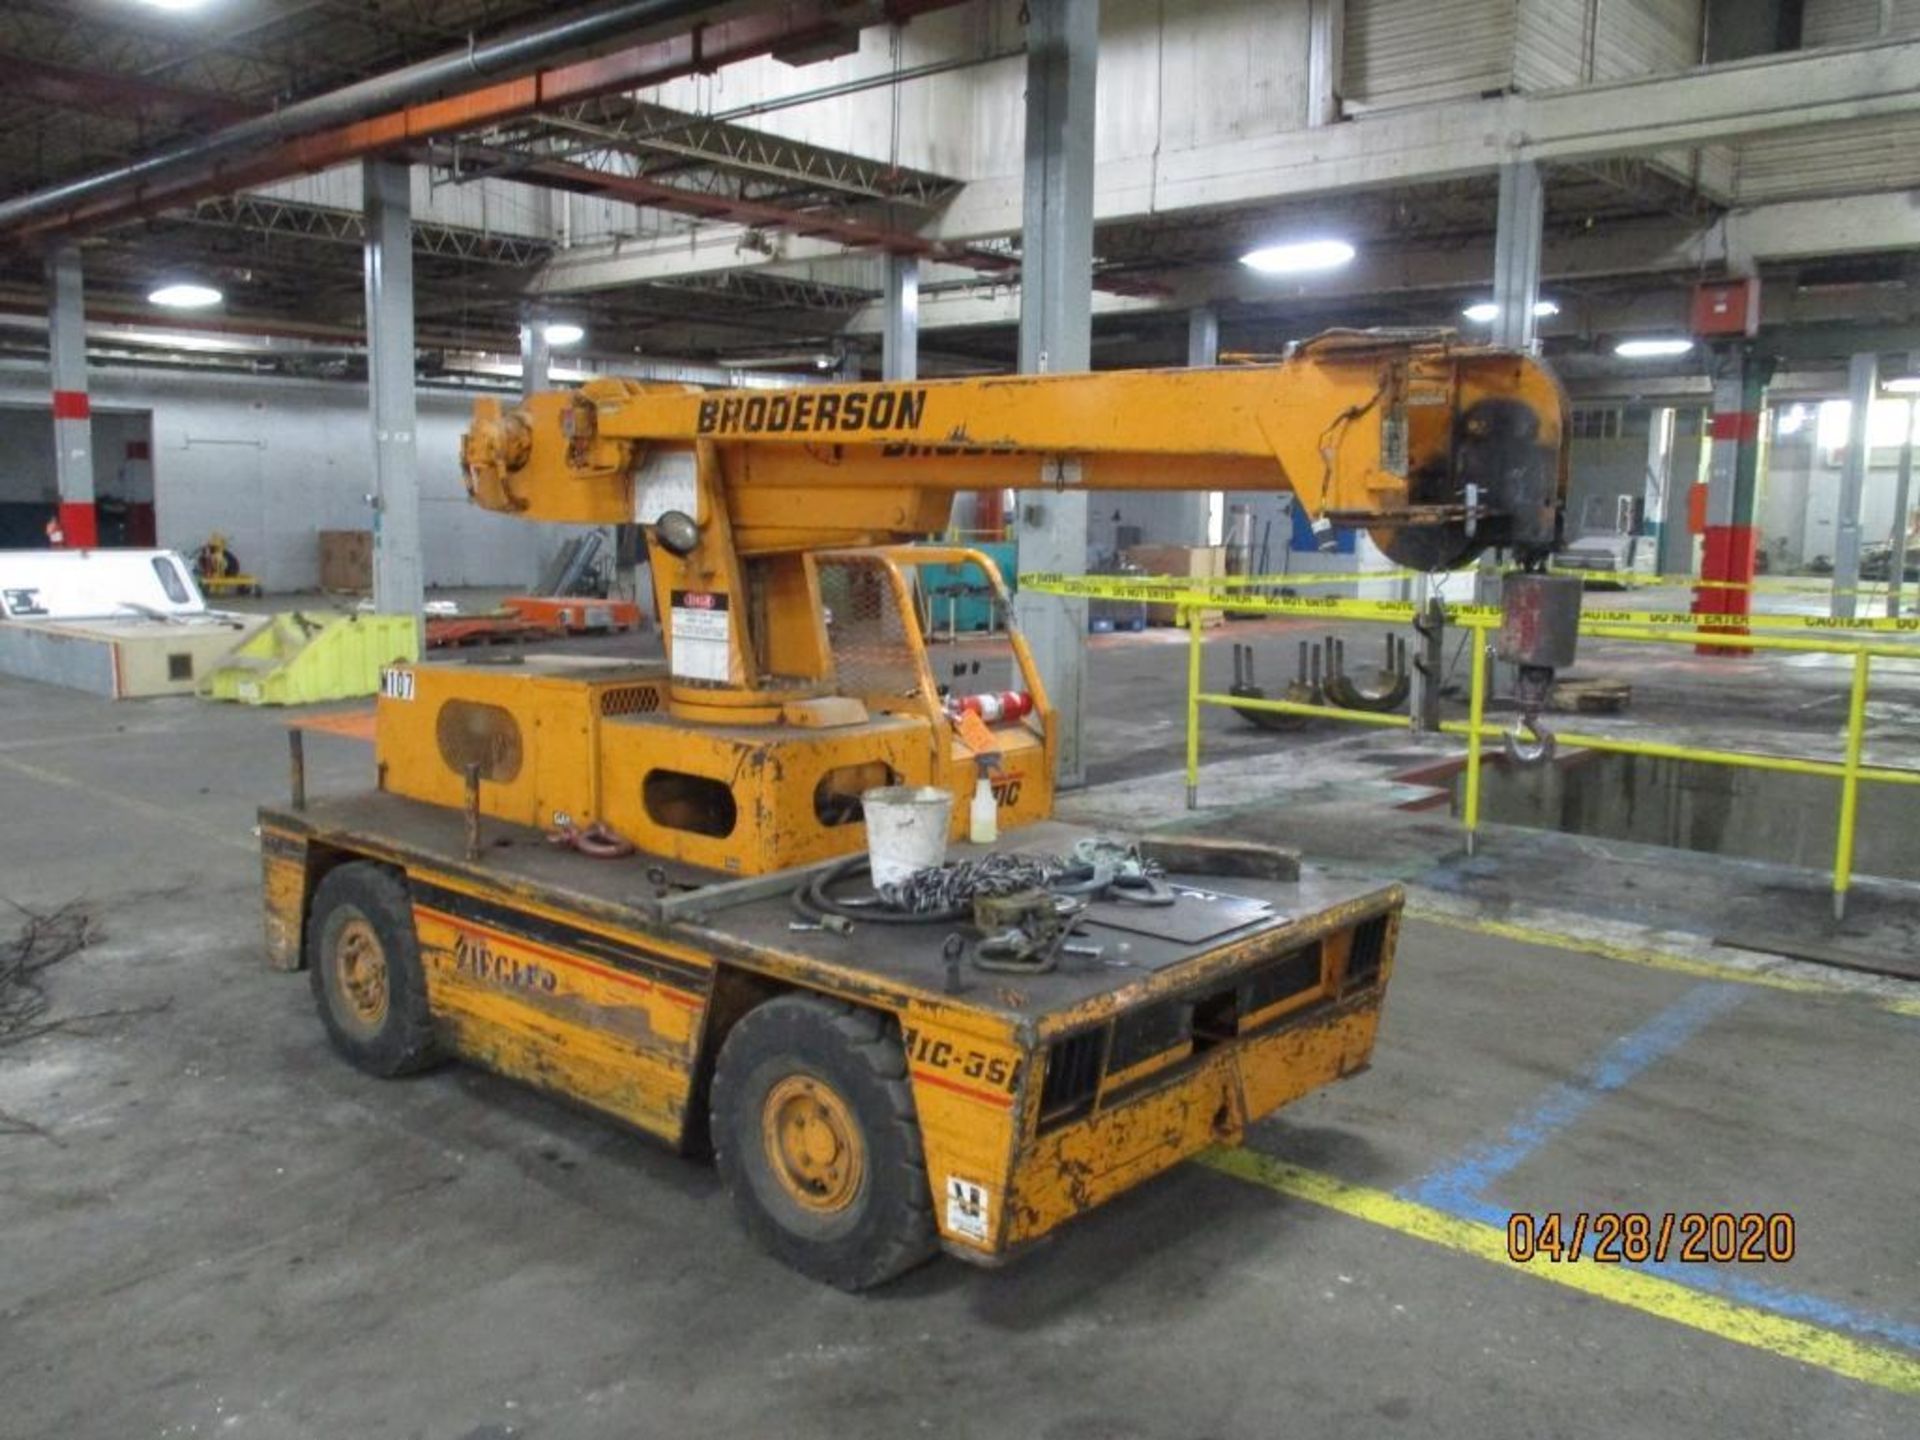 Broderson Mfg. Industrial Crane, Three Section Hydraulically Extended Boom With 8,000lb Capacity, Ho - Image 4 of 11